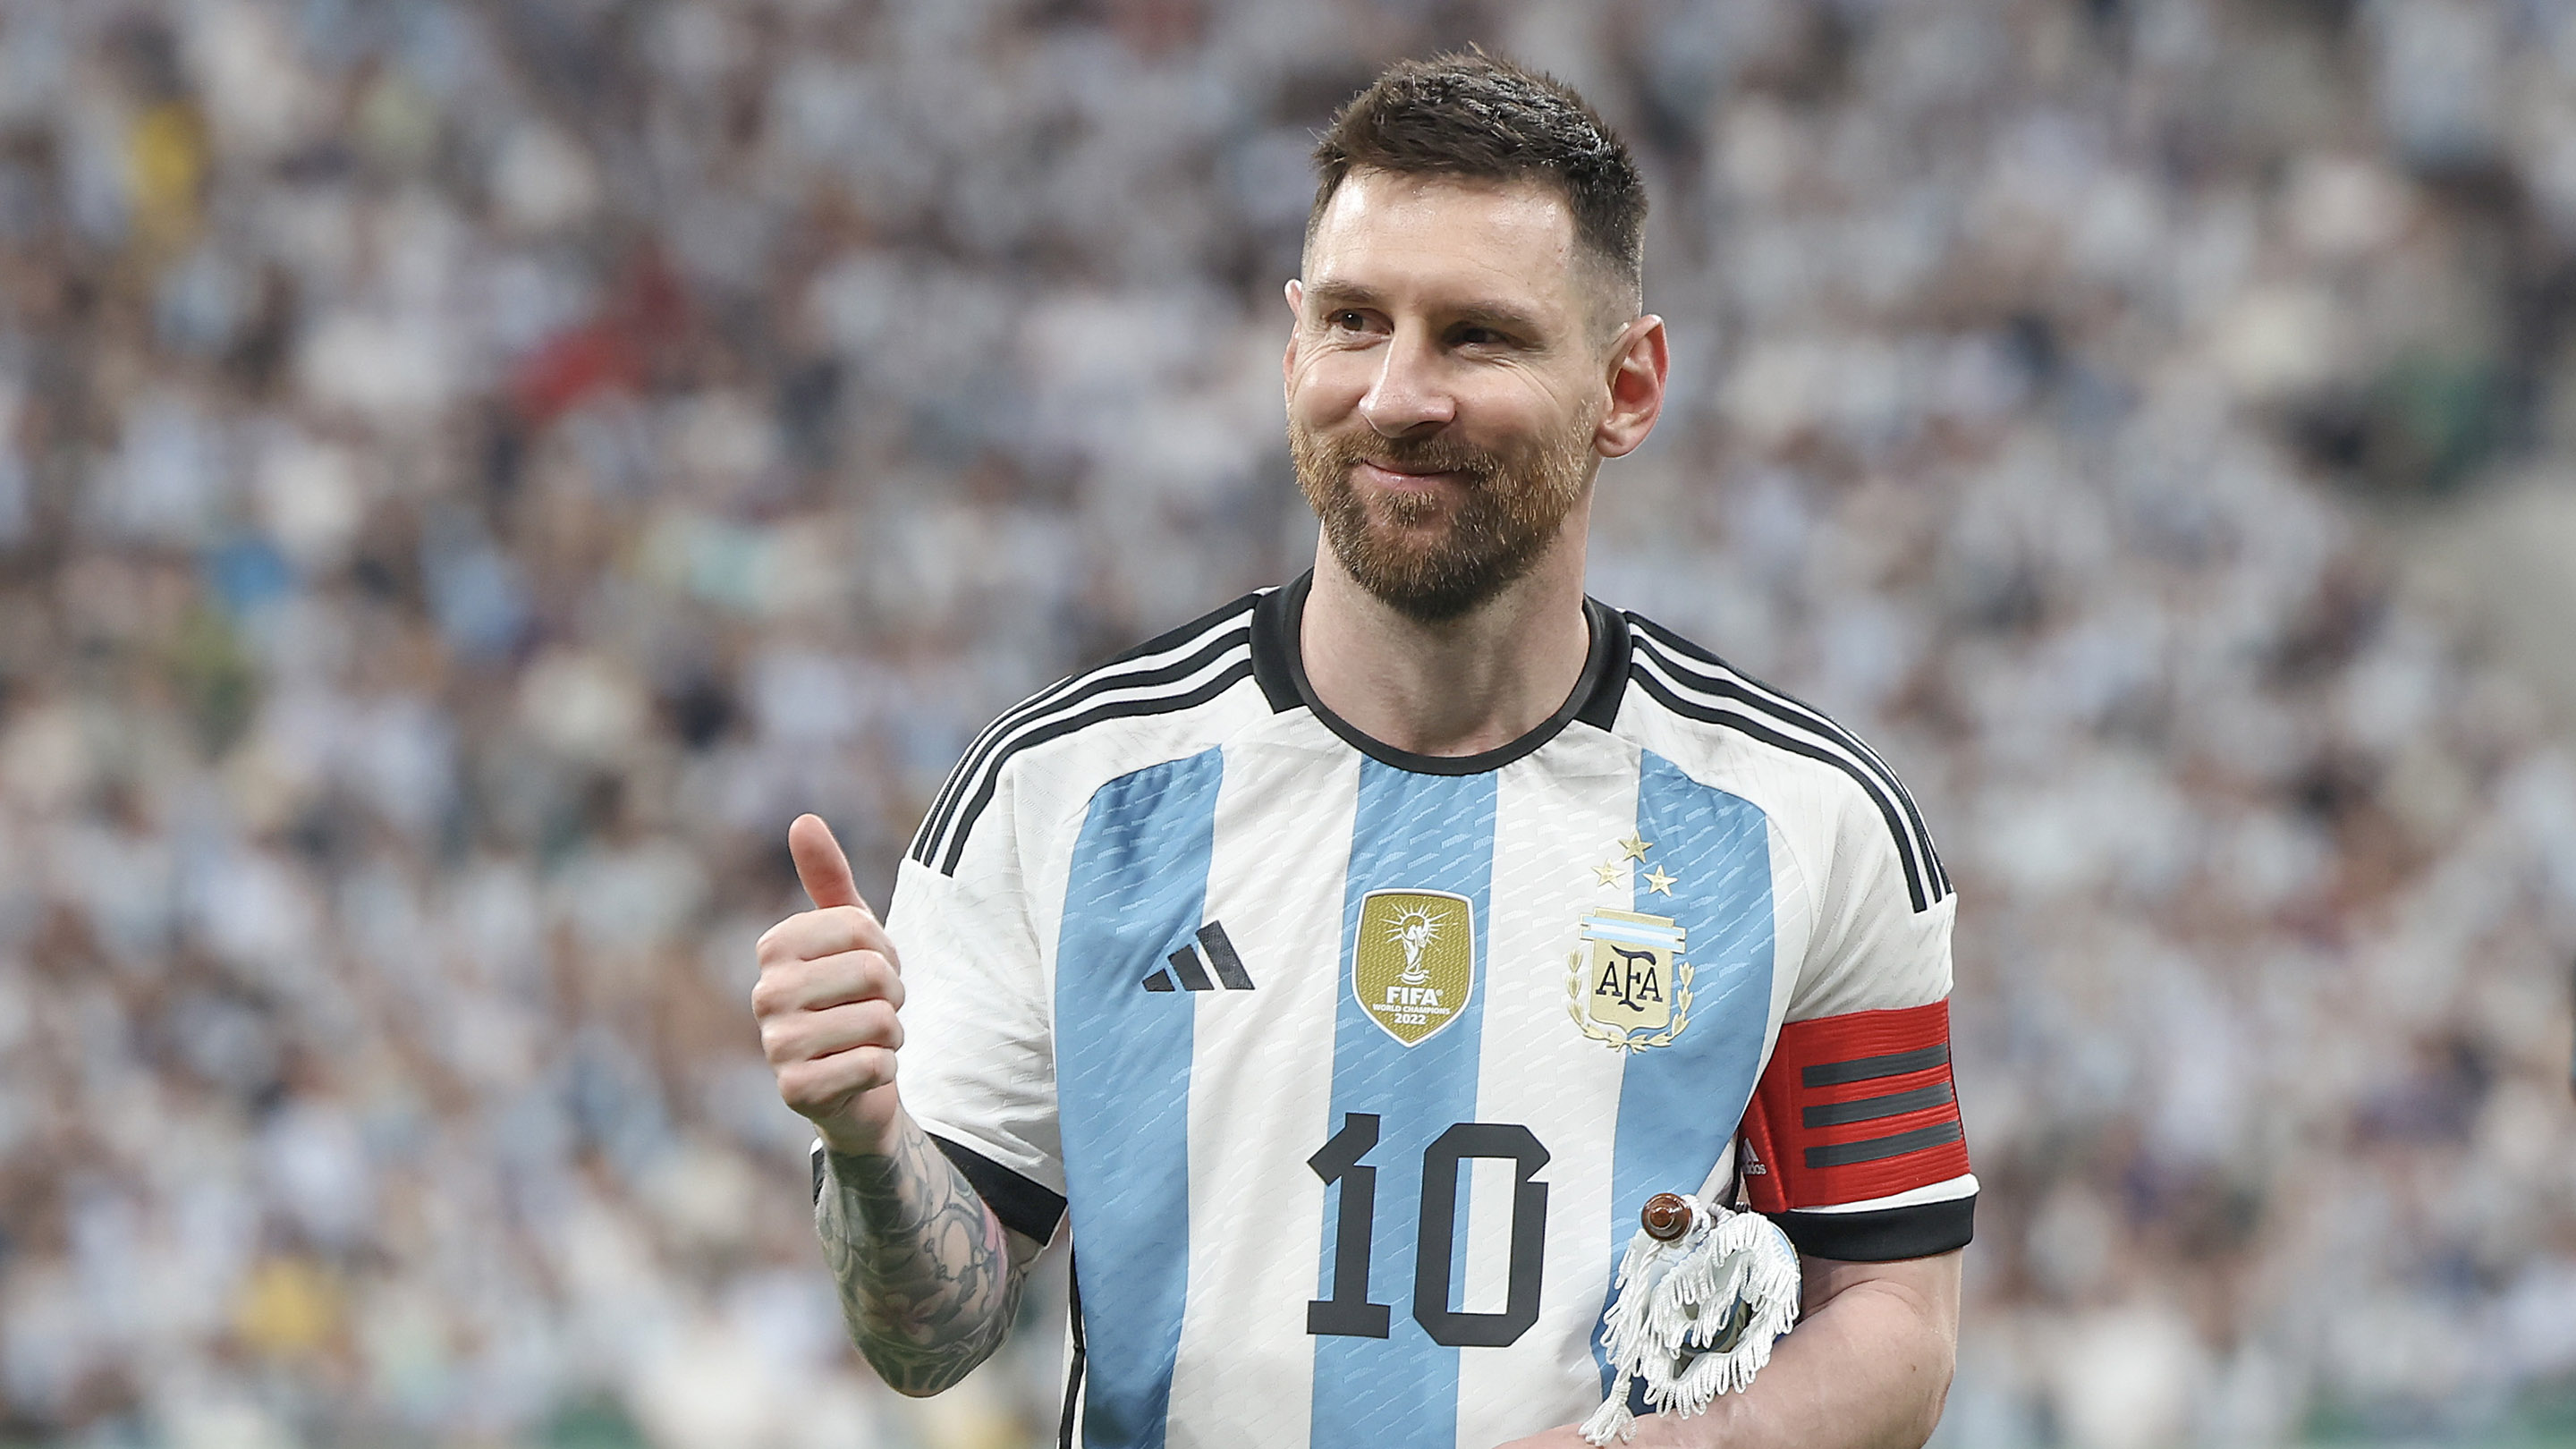 Who is Lionel Messi? Salary, teams and more